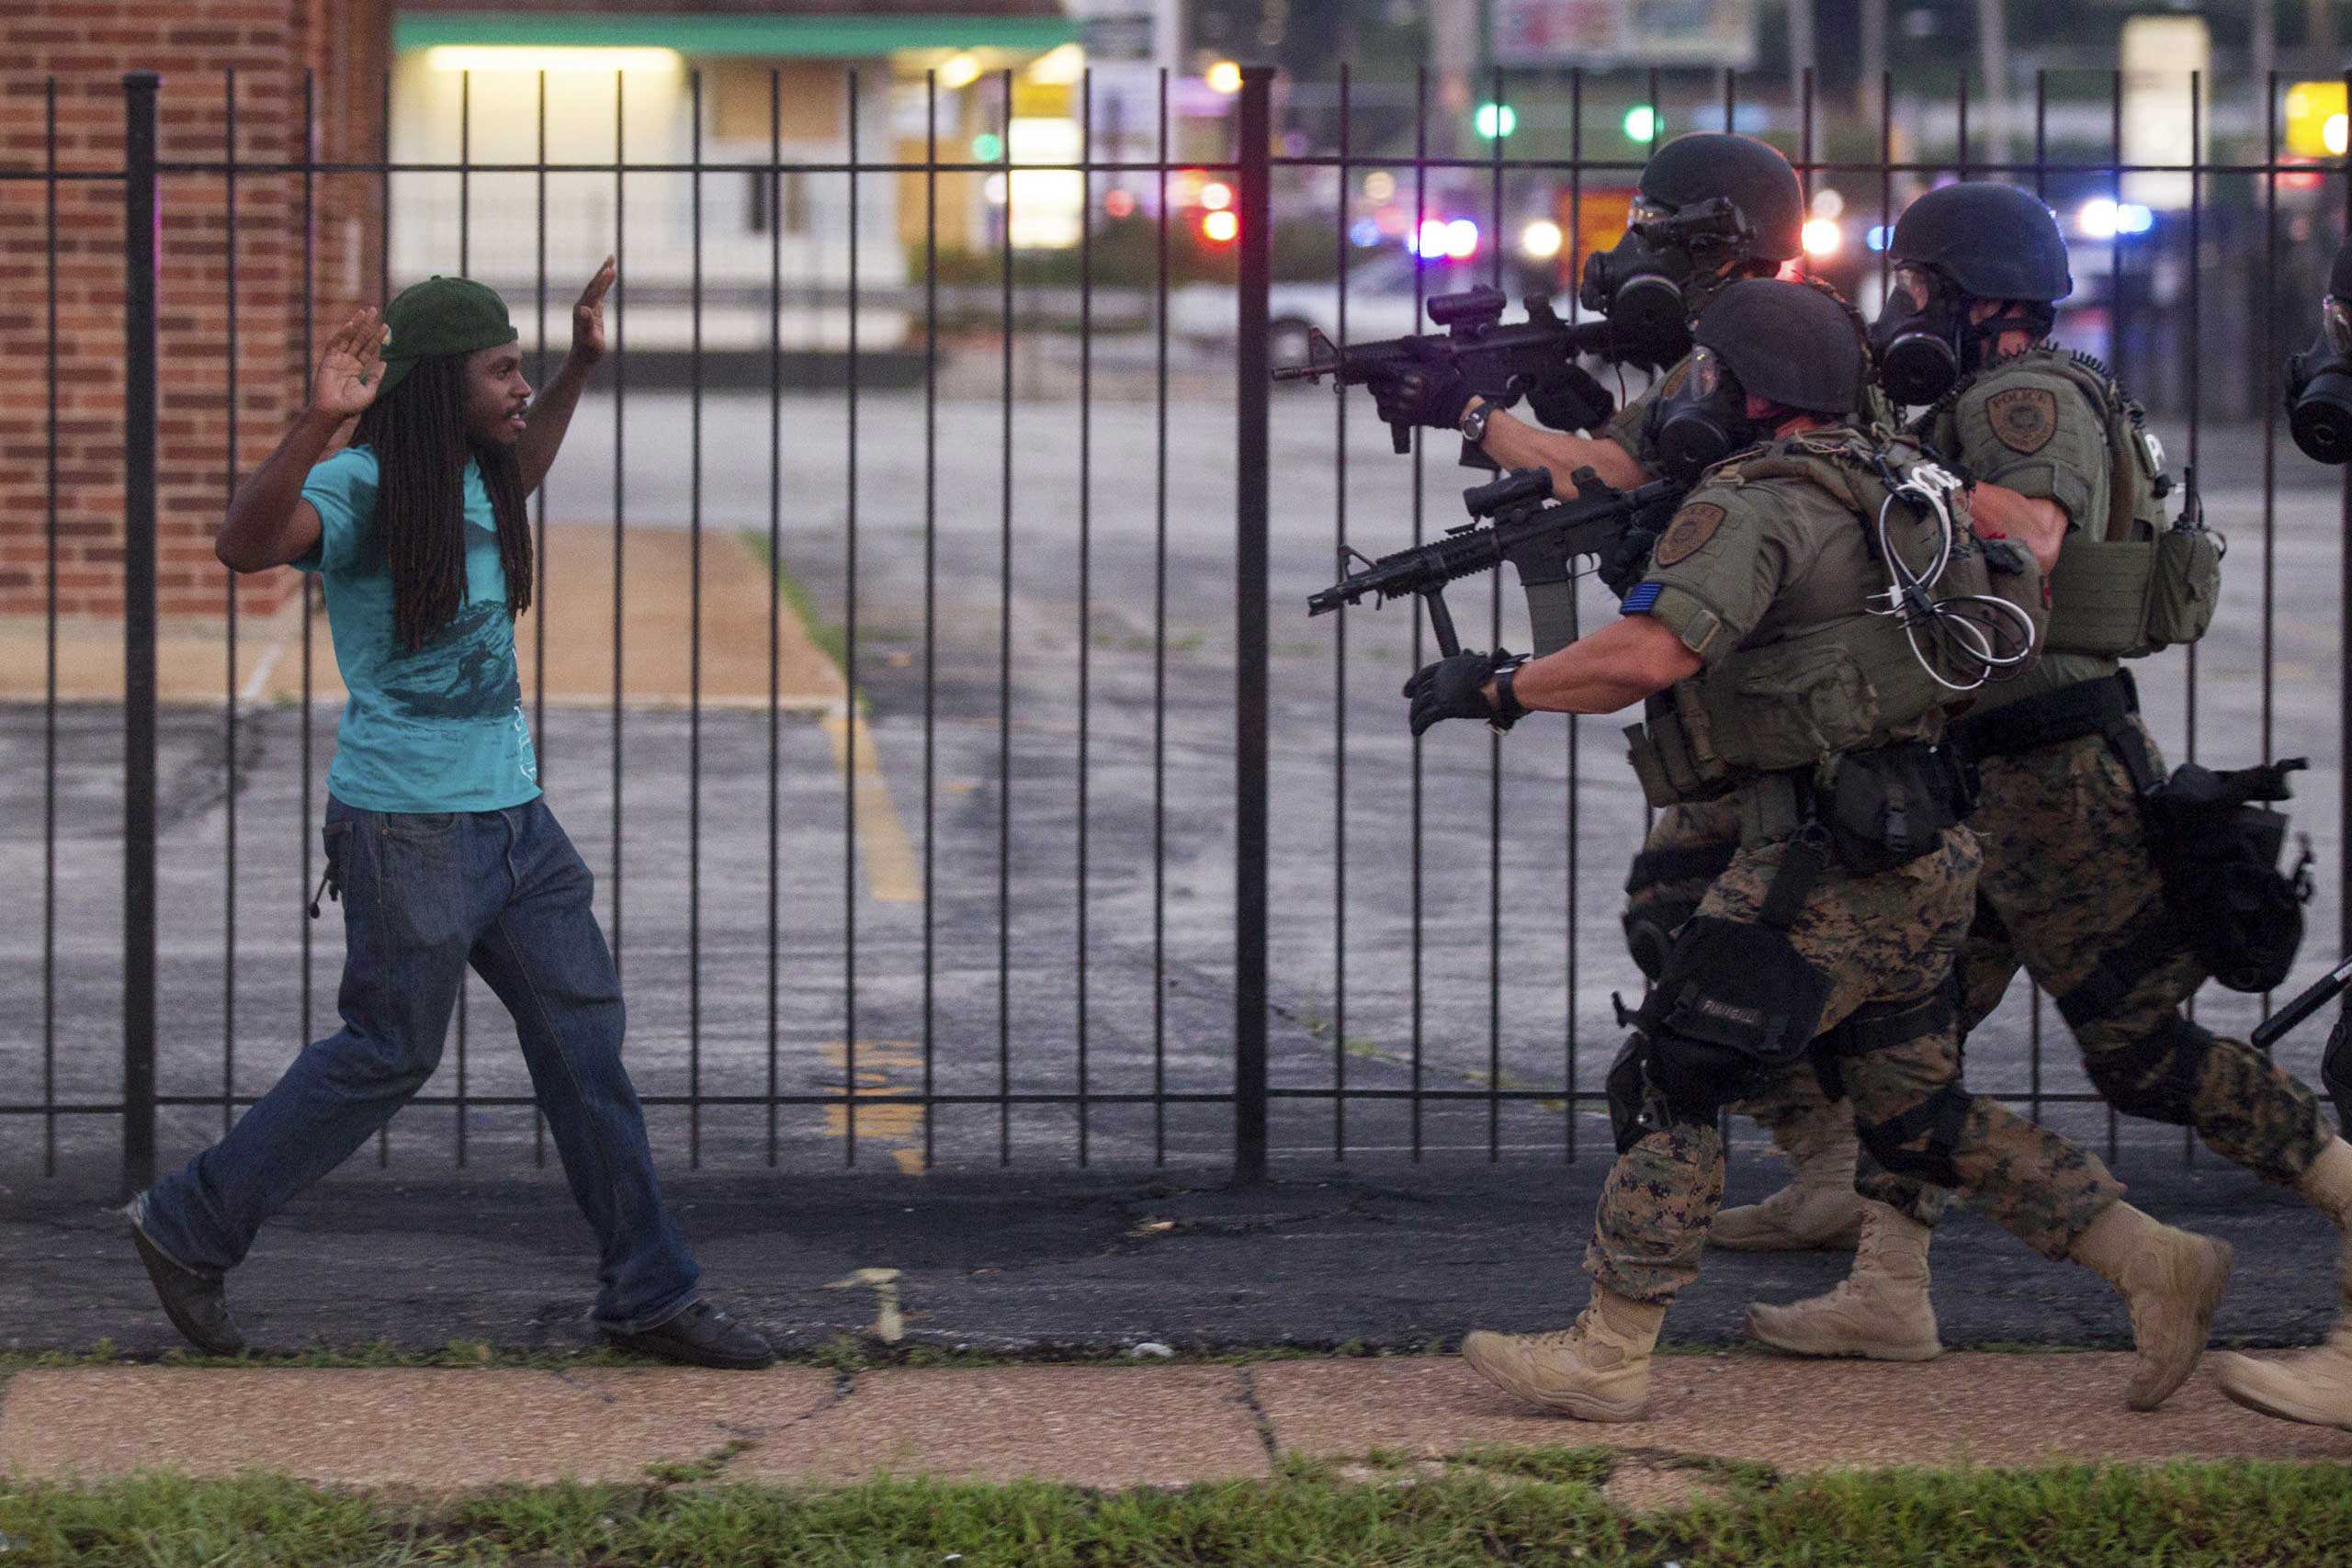 A man backs away as law enforcement officials close in on him and eventually detain him during protests over the death of Michael Brown in Ferguson, Mo., Aug. 11, 2014.